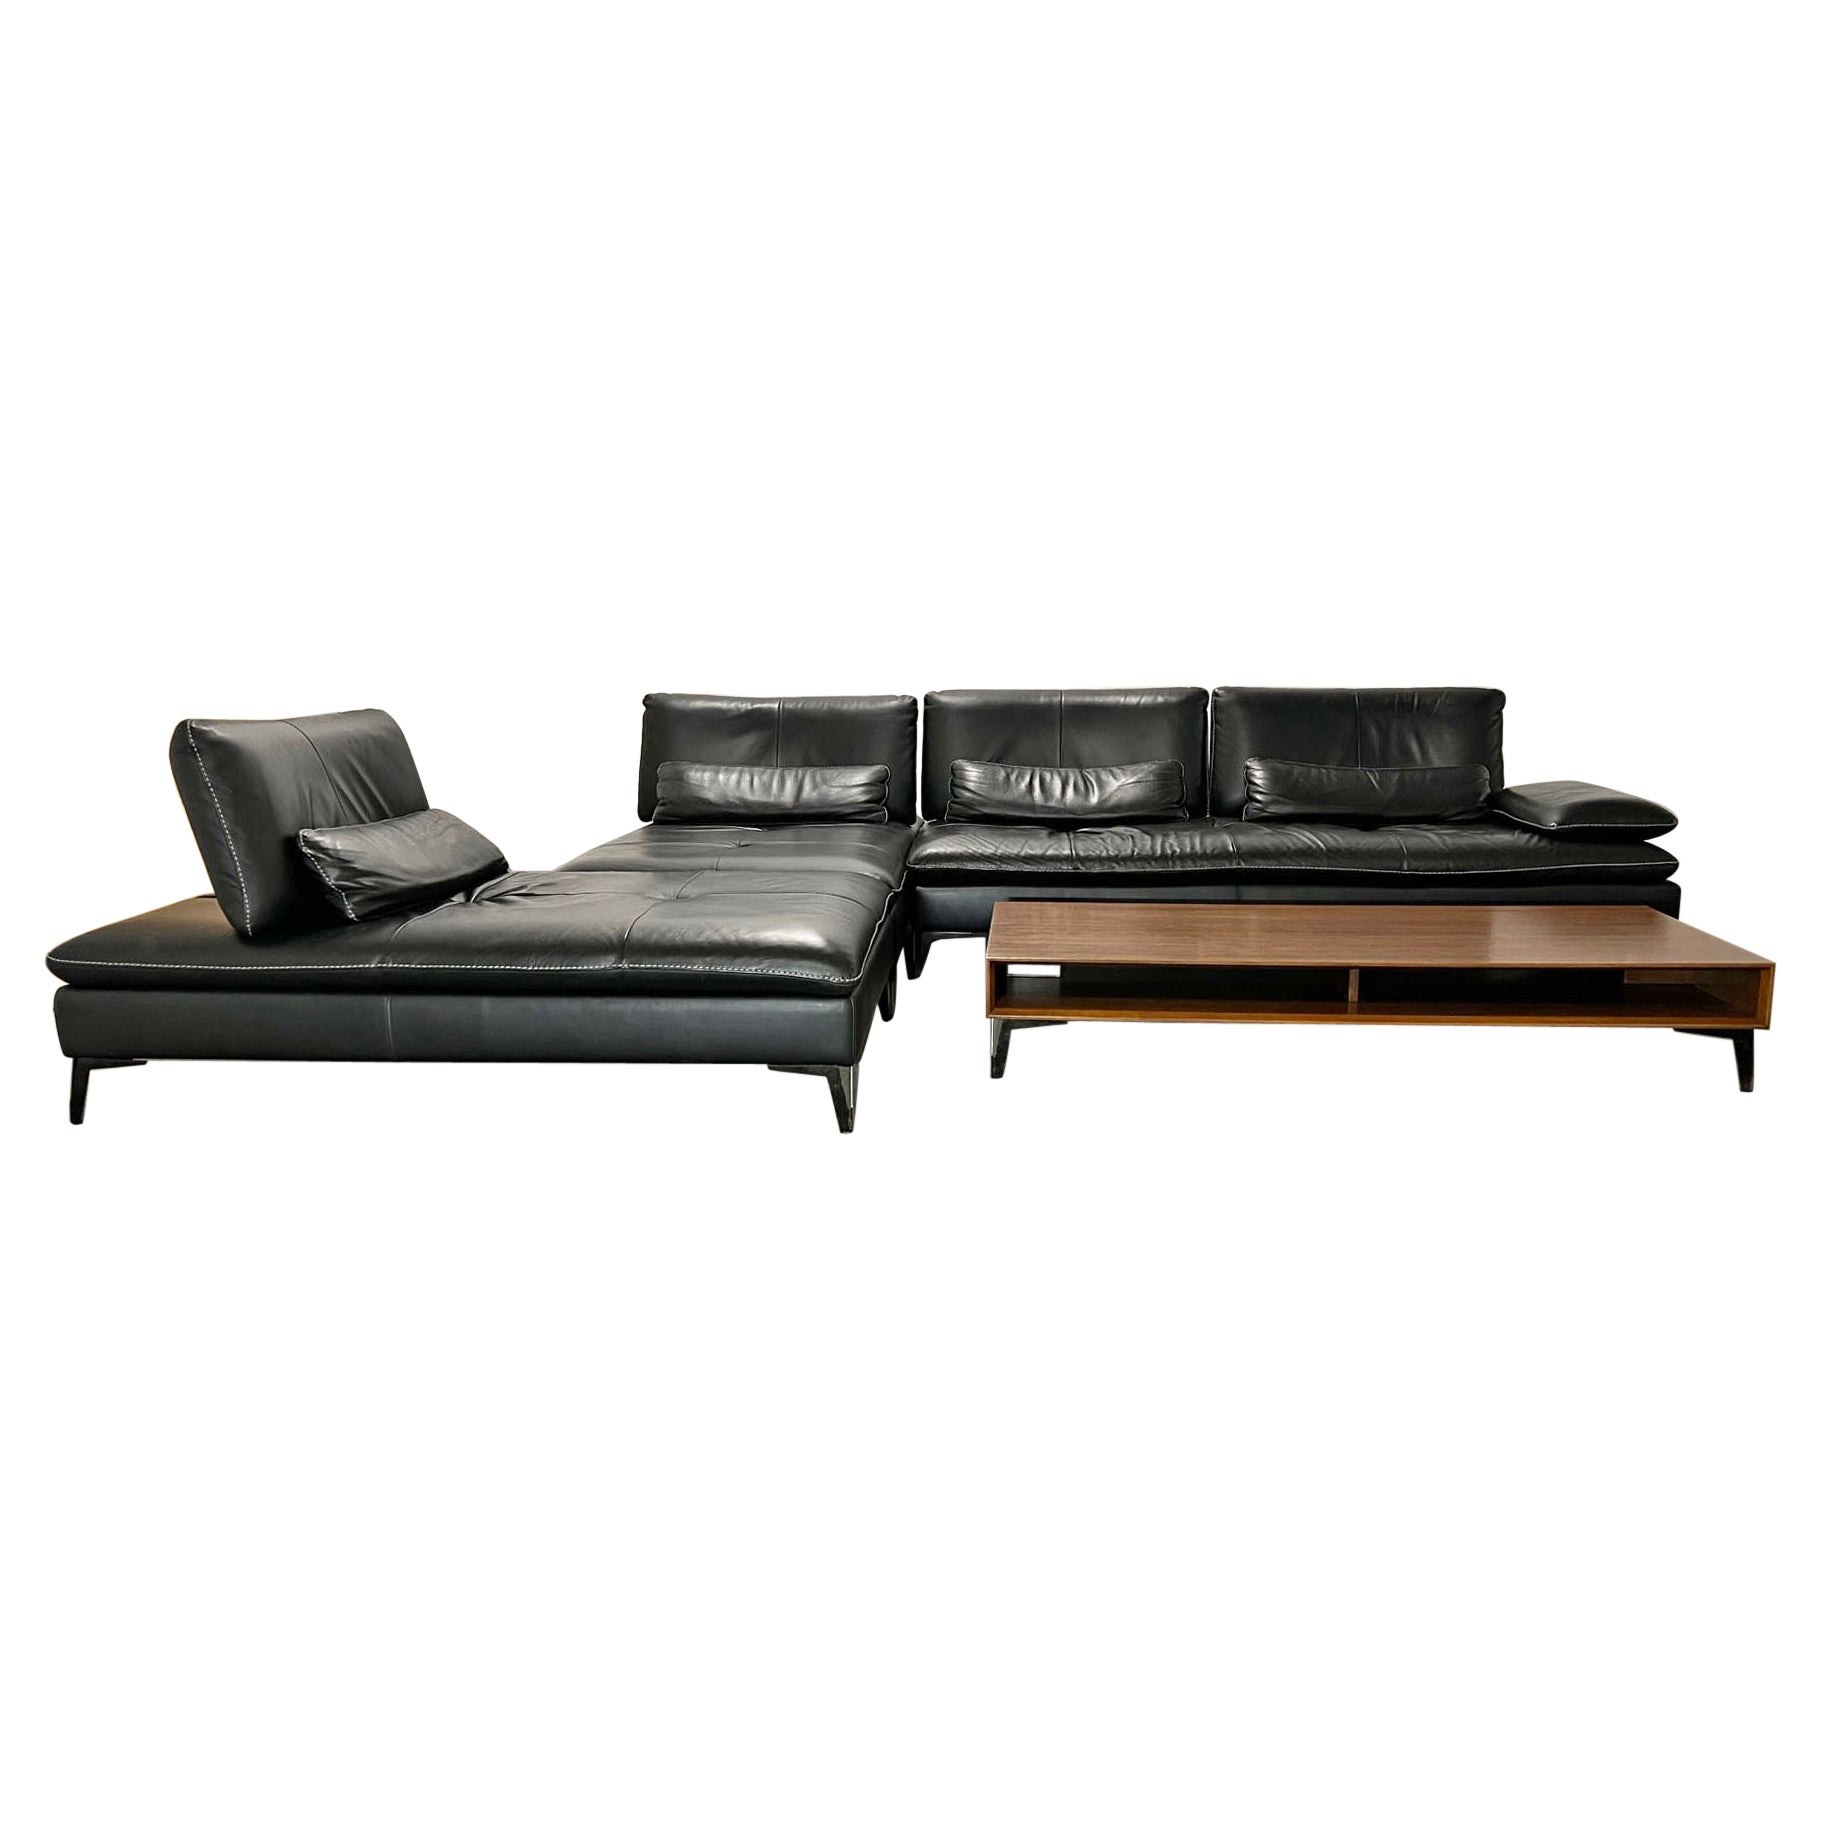 Roche Bobois Leather Sectional "Scenario" Sofa and Coffee Table by Sacha Lakic